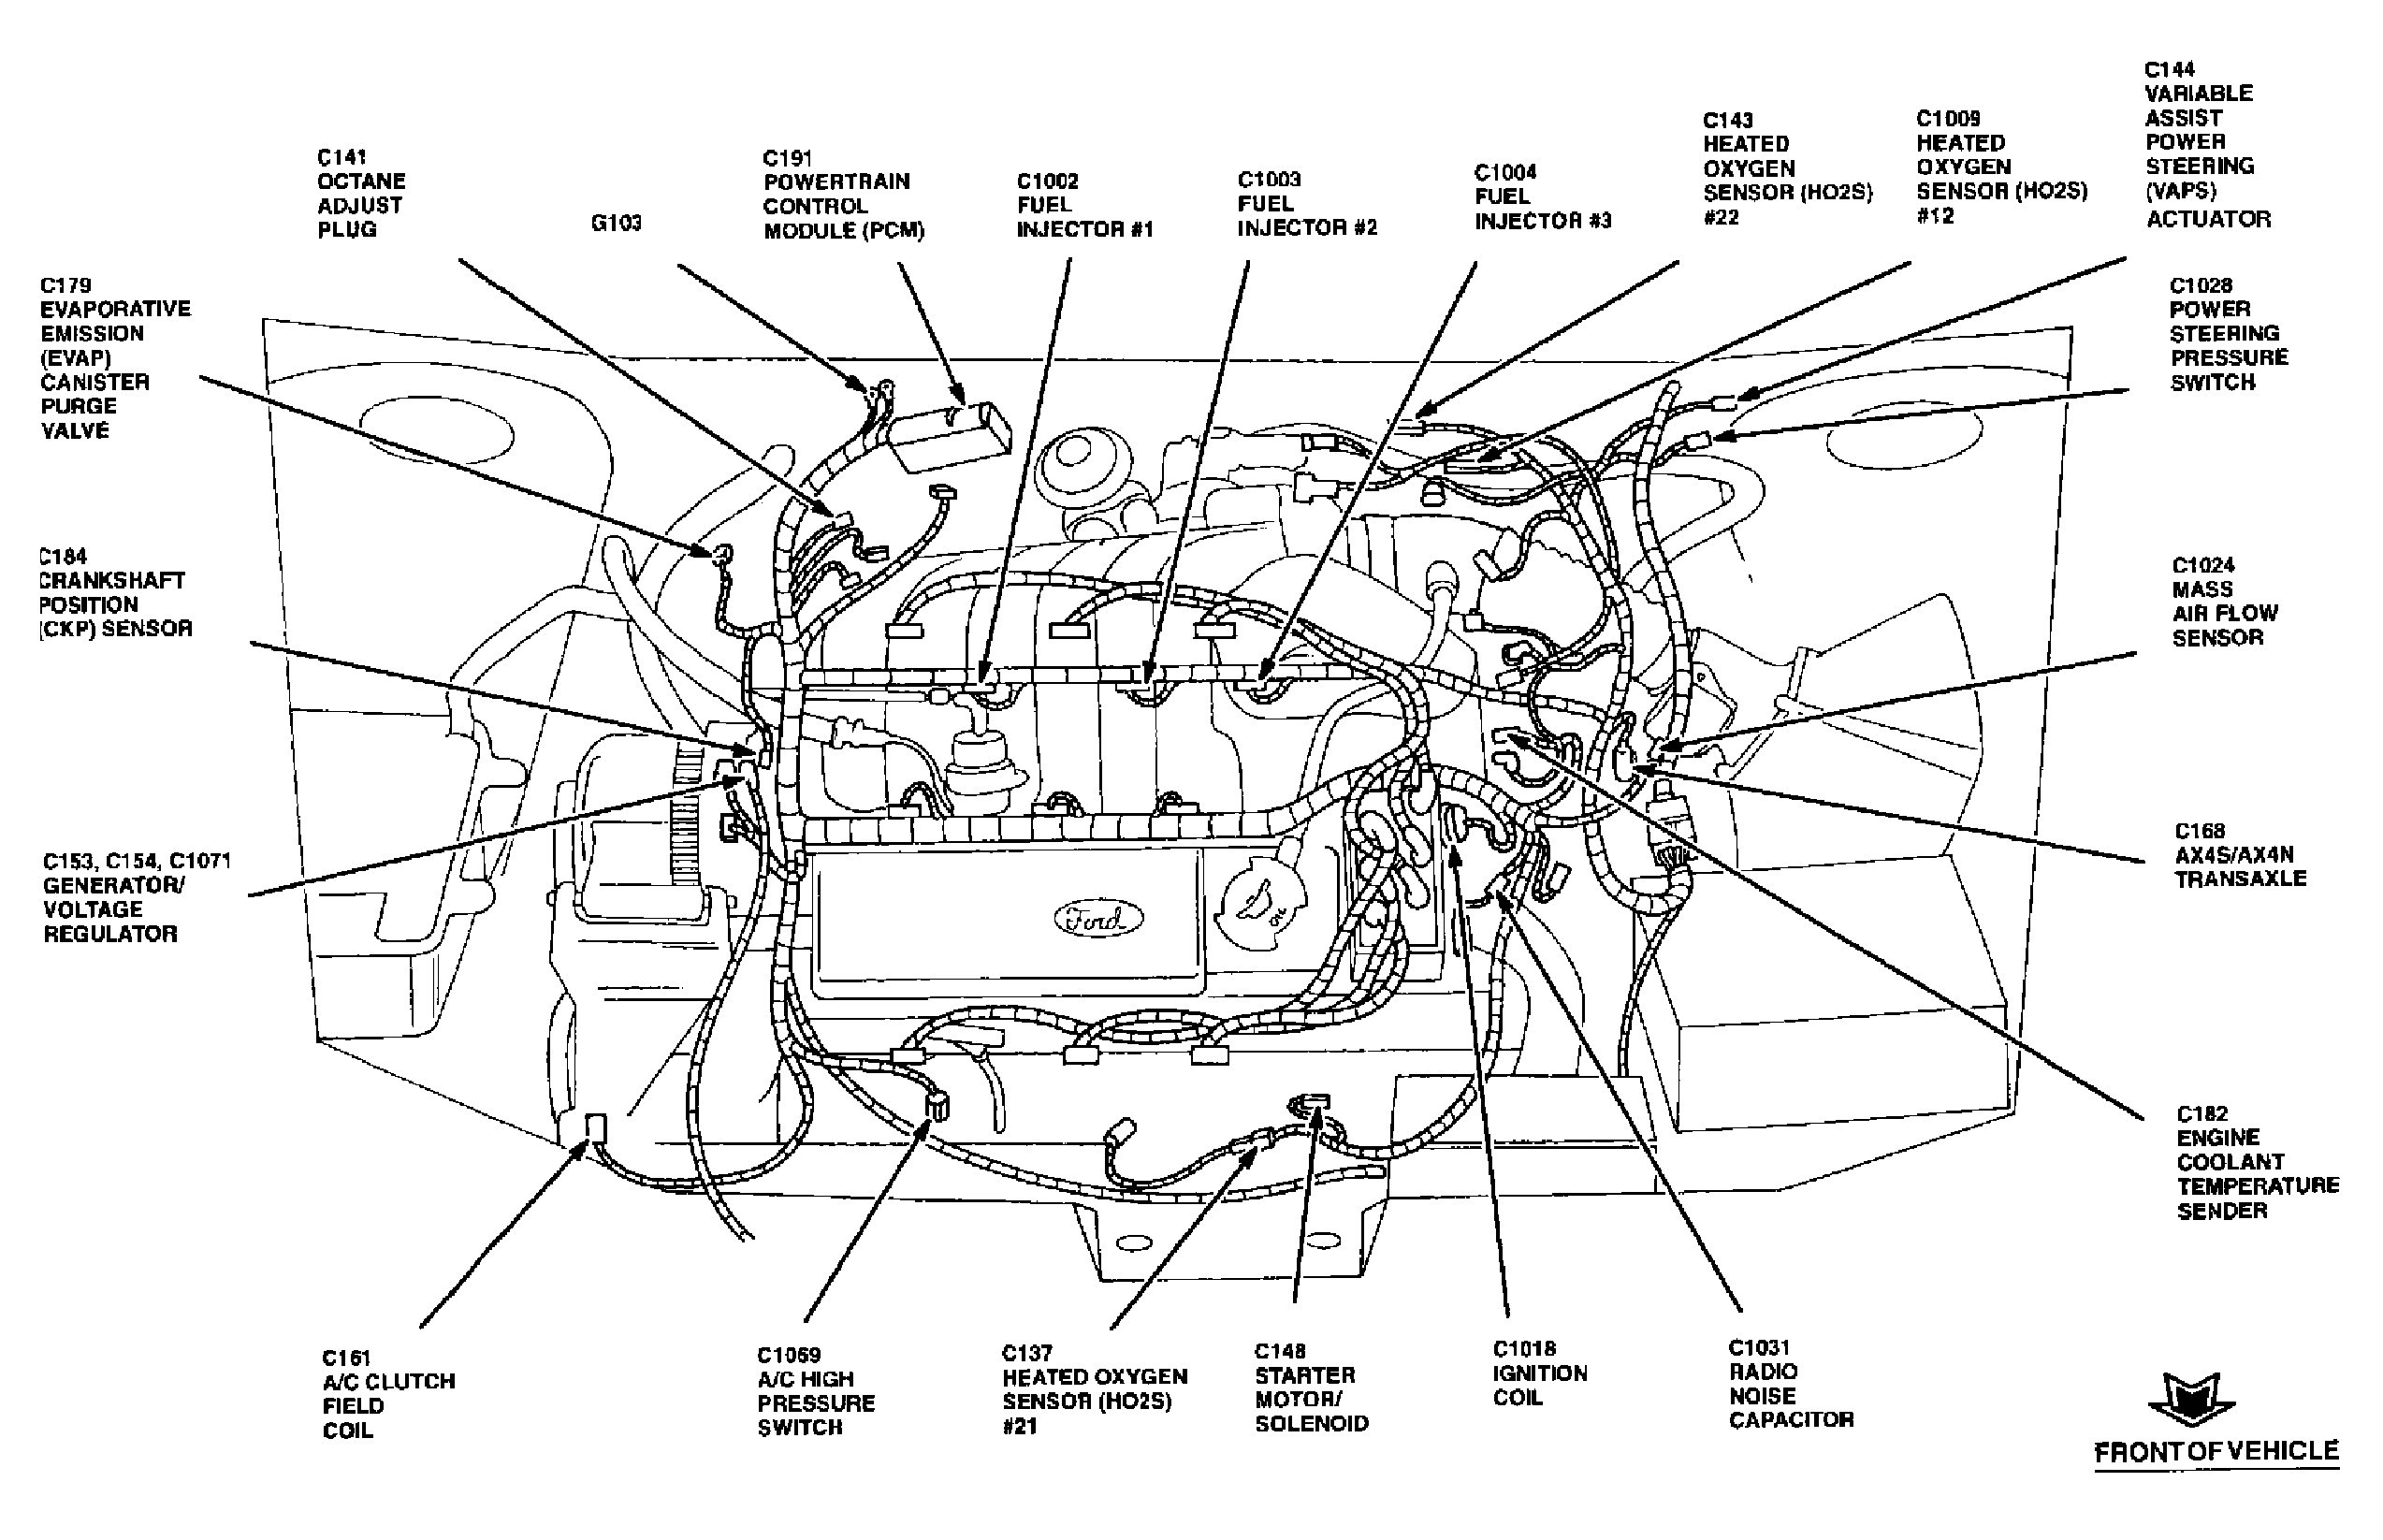 2004 Ford Taurus 3.0 Dohc Firing Order | Wiring and Printable